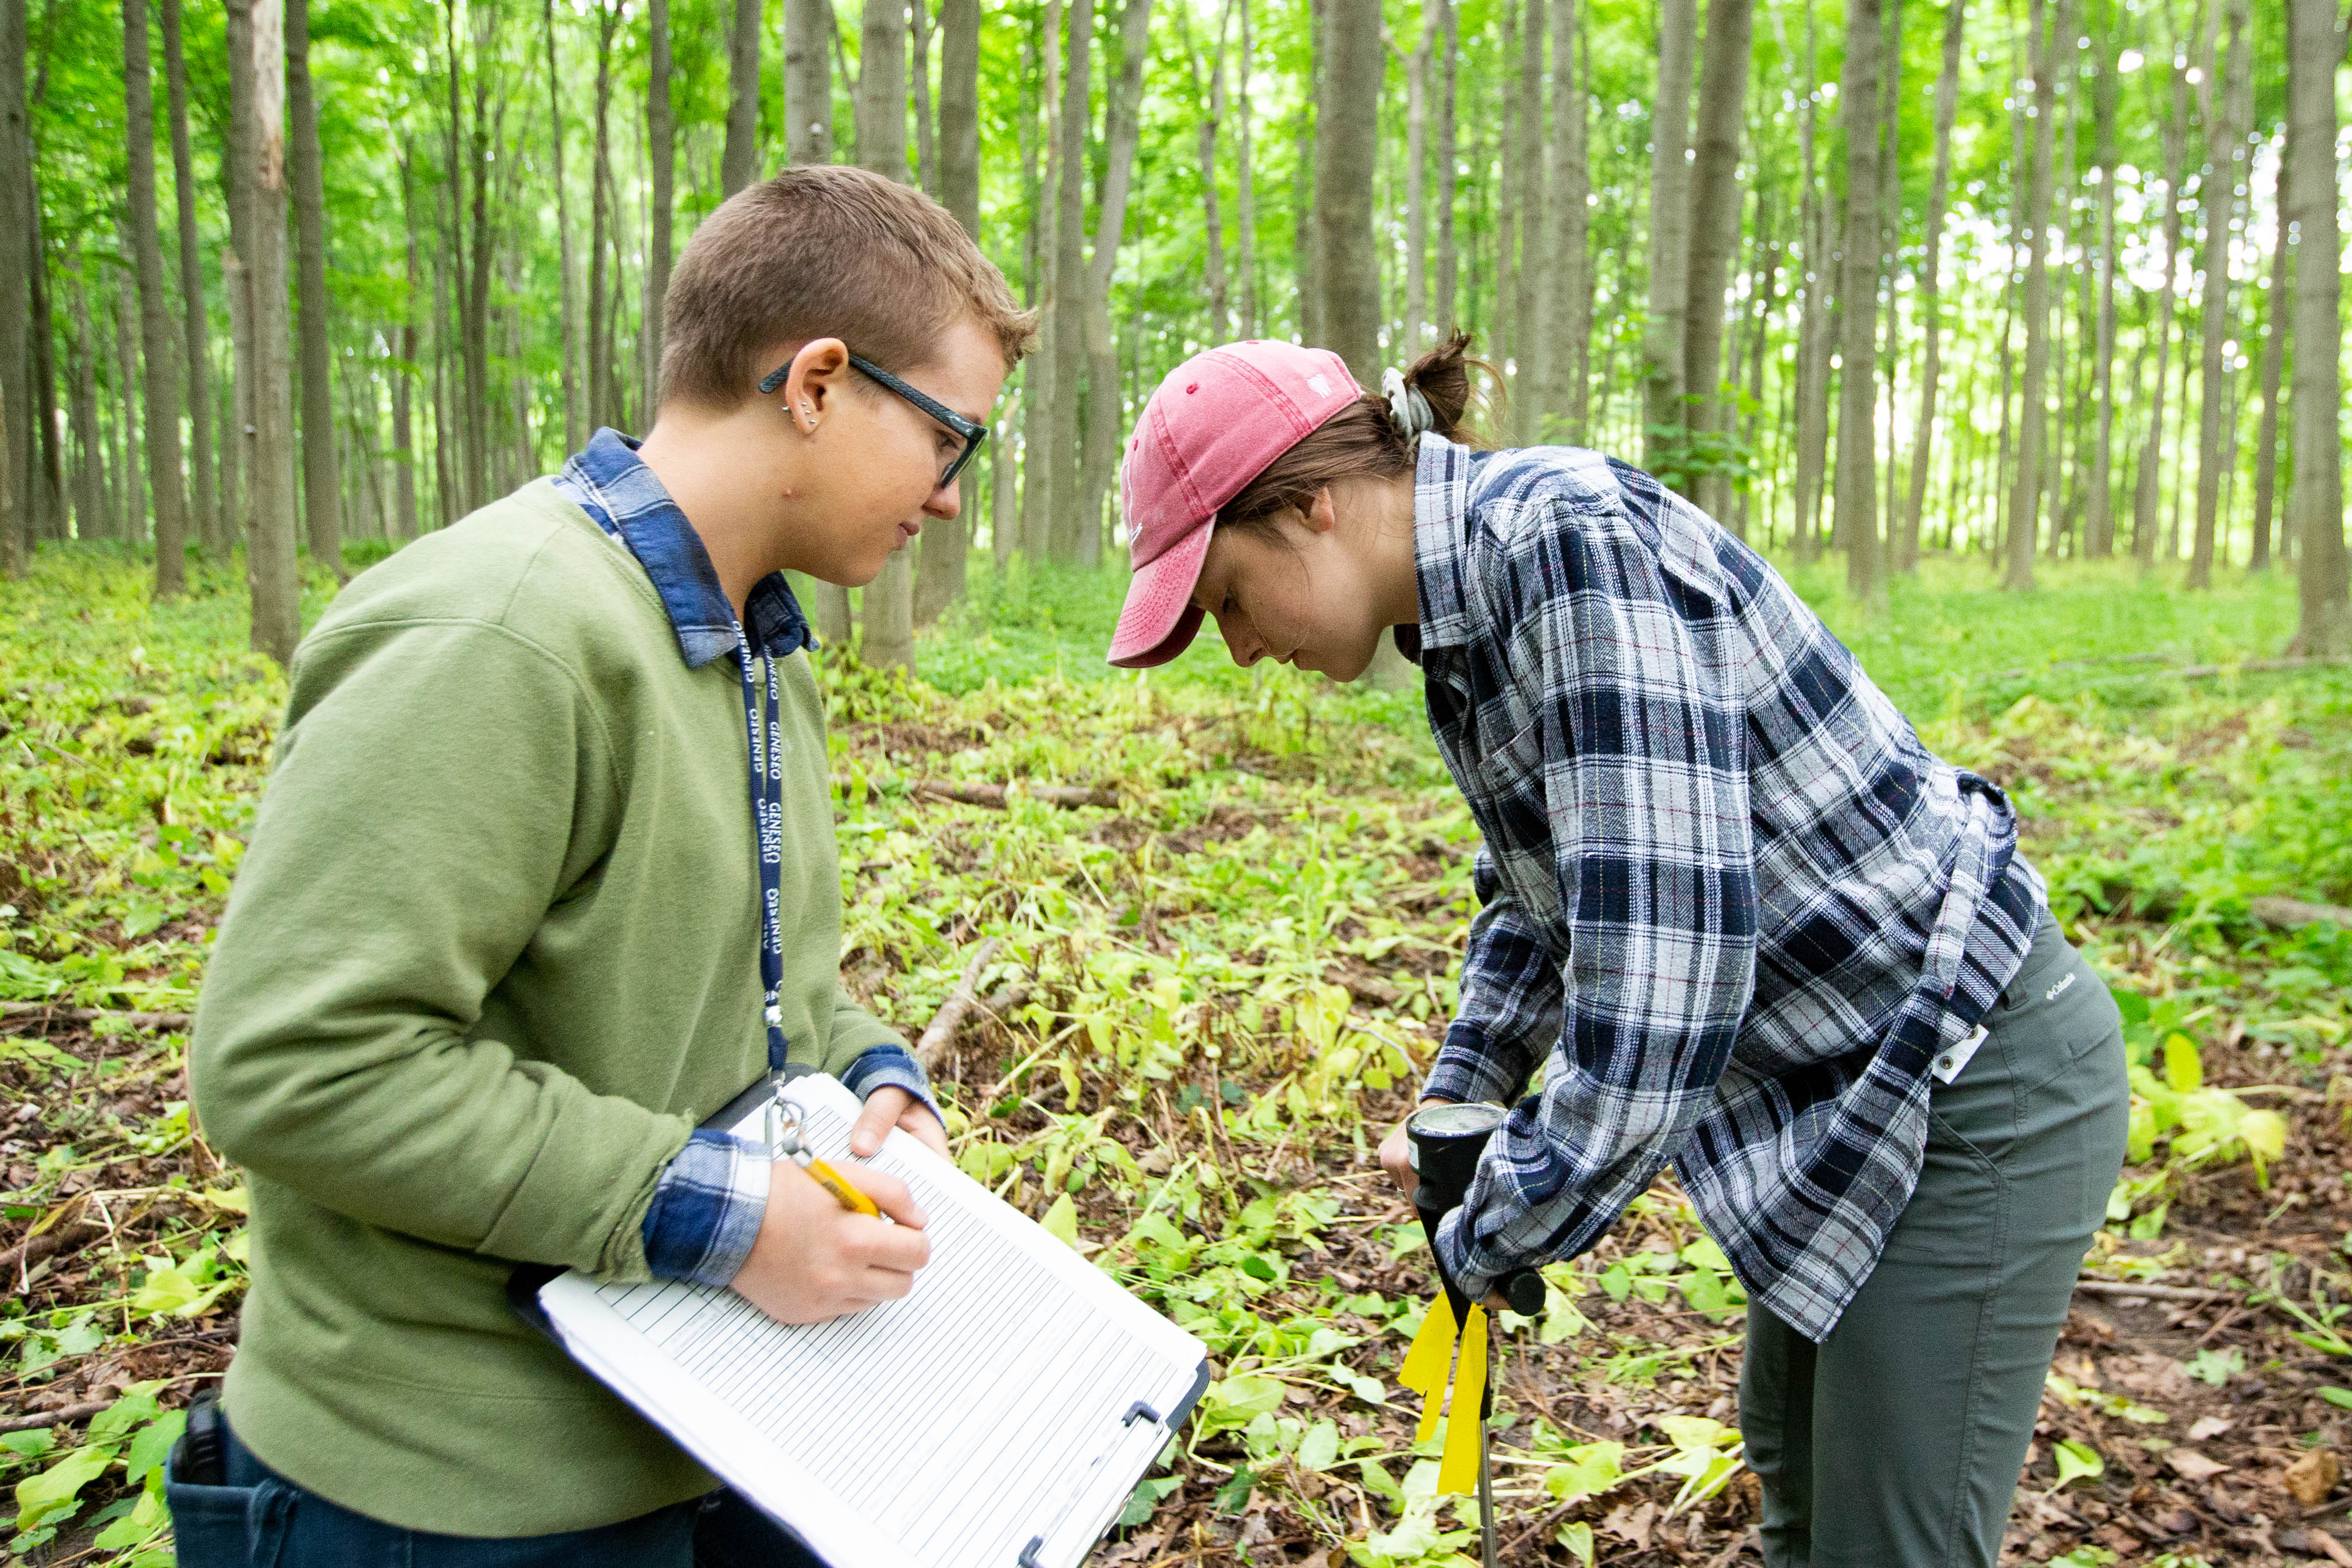 Students conducting field research